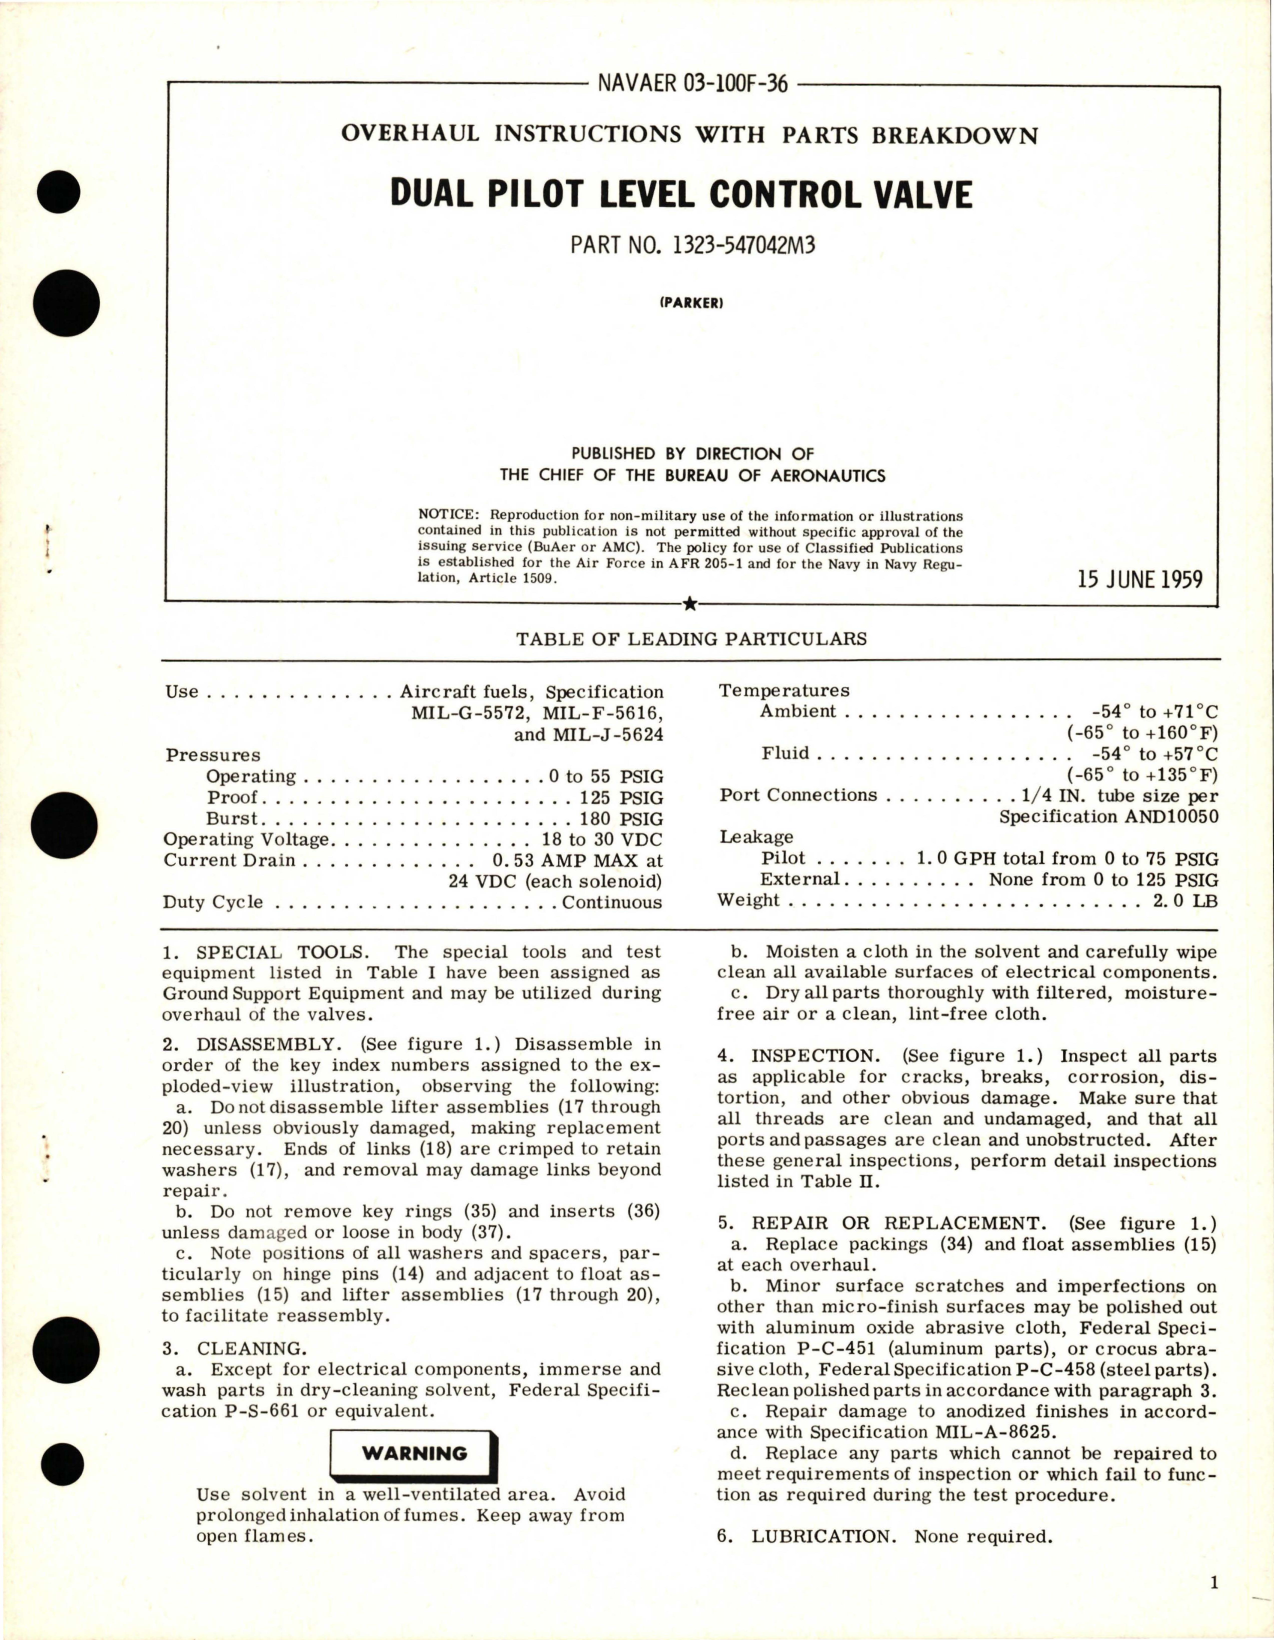 Sample page 1 from AirCorps Library document: Overhaul Instructions with Parts Breakdown for Duel Pilot Level Control Valve - Part 1323-547042M3